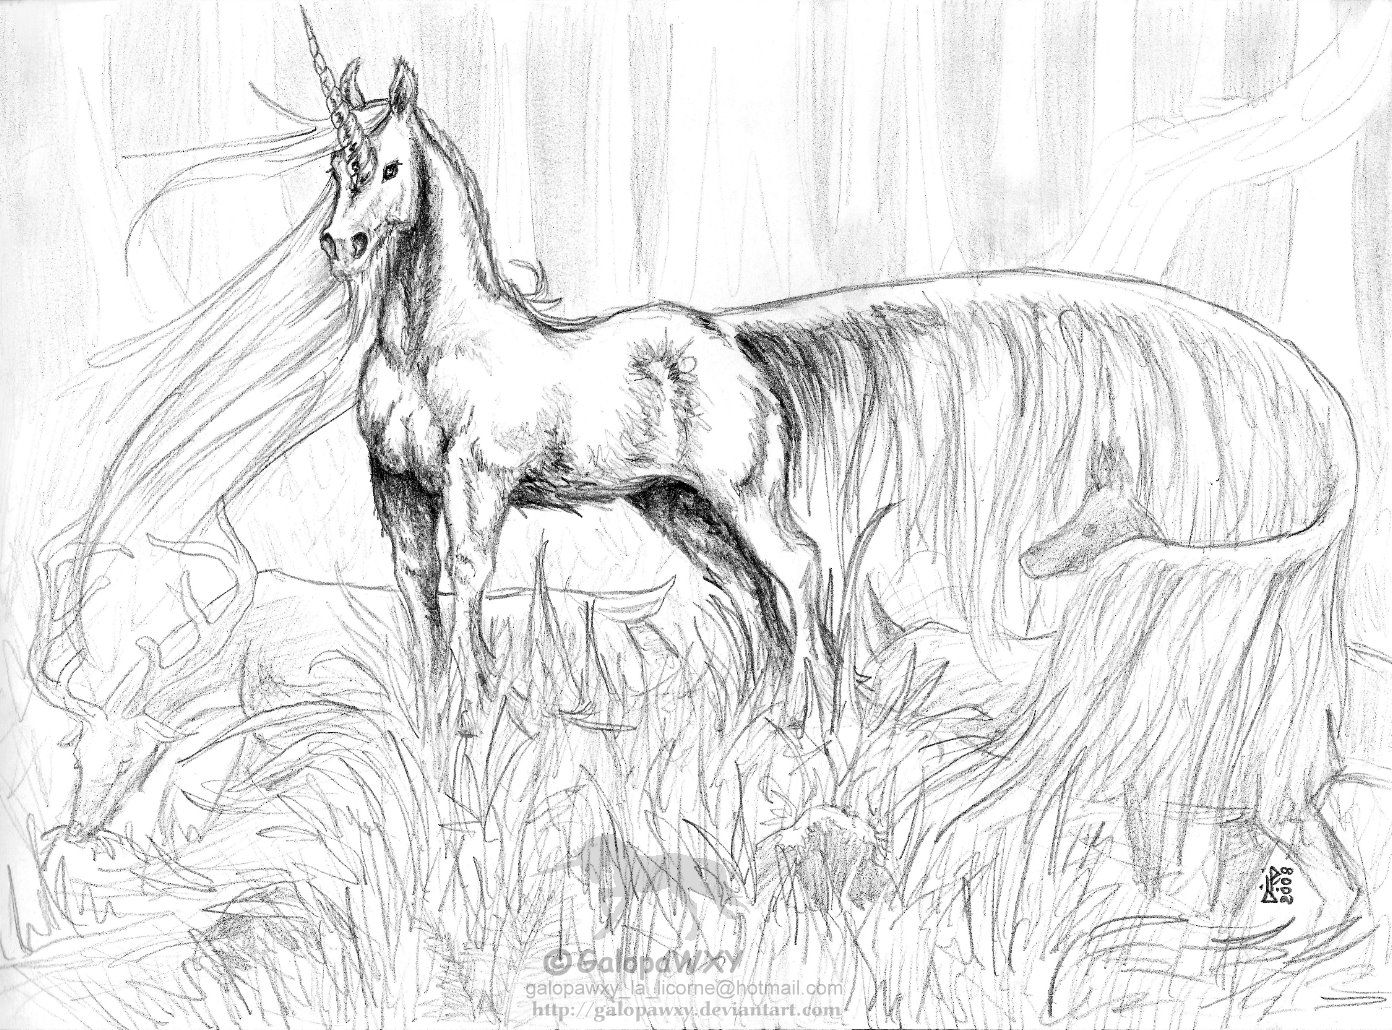 Detailed Unicorn Coloring Pages at GetColorings.com | Free ...